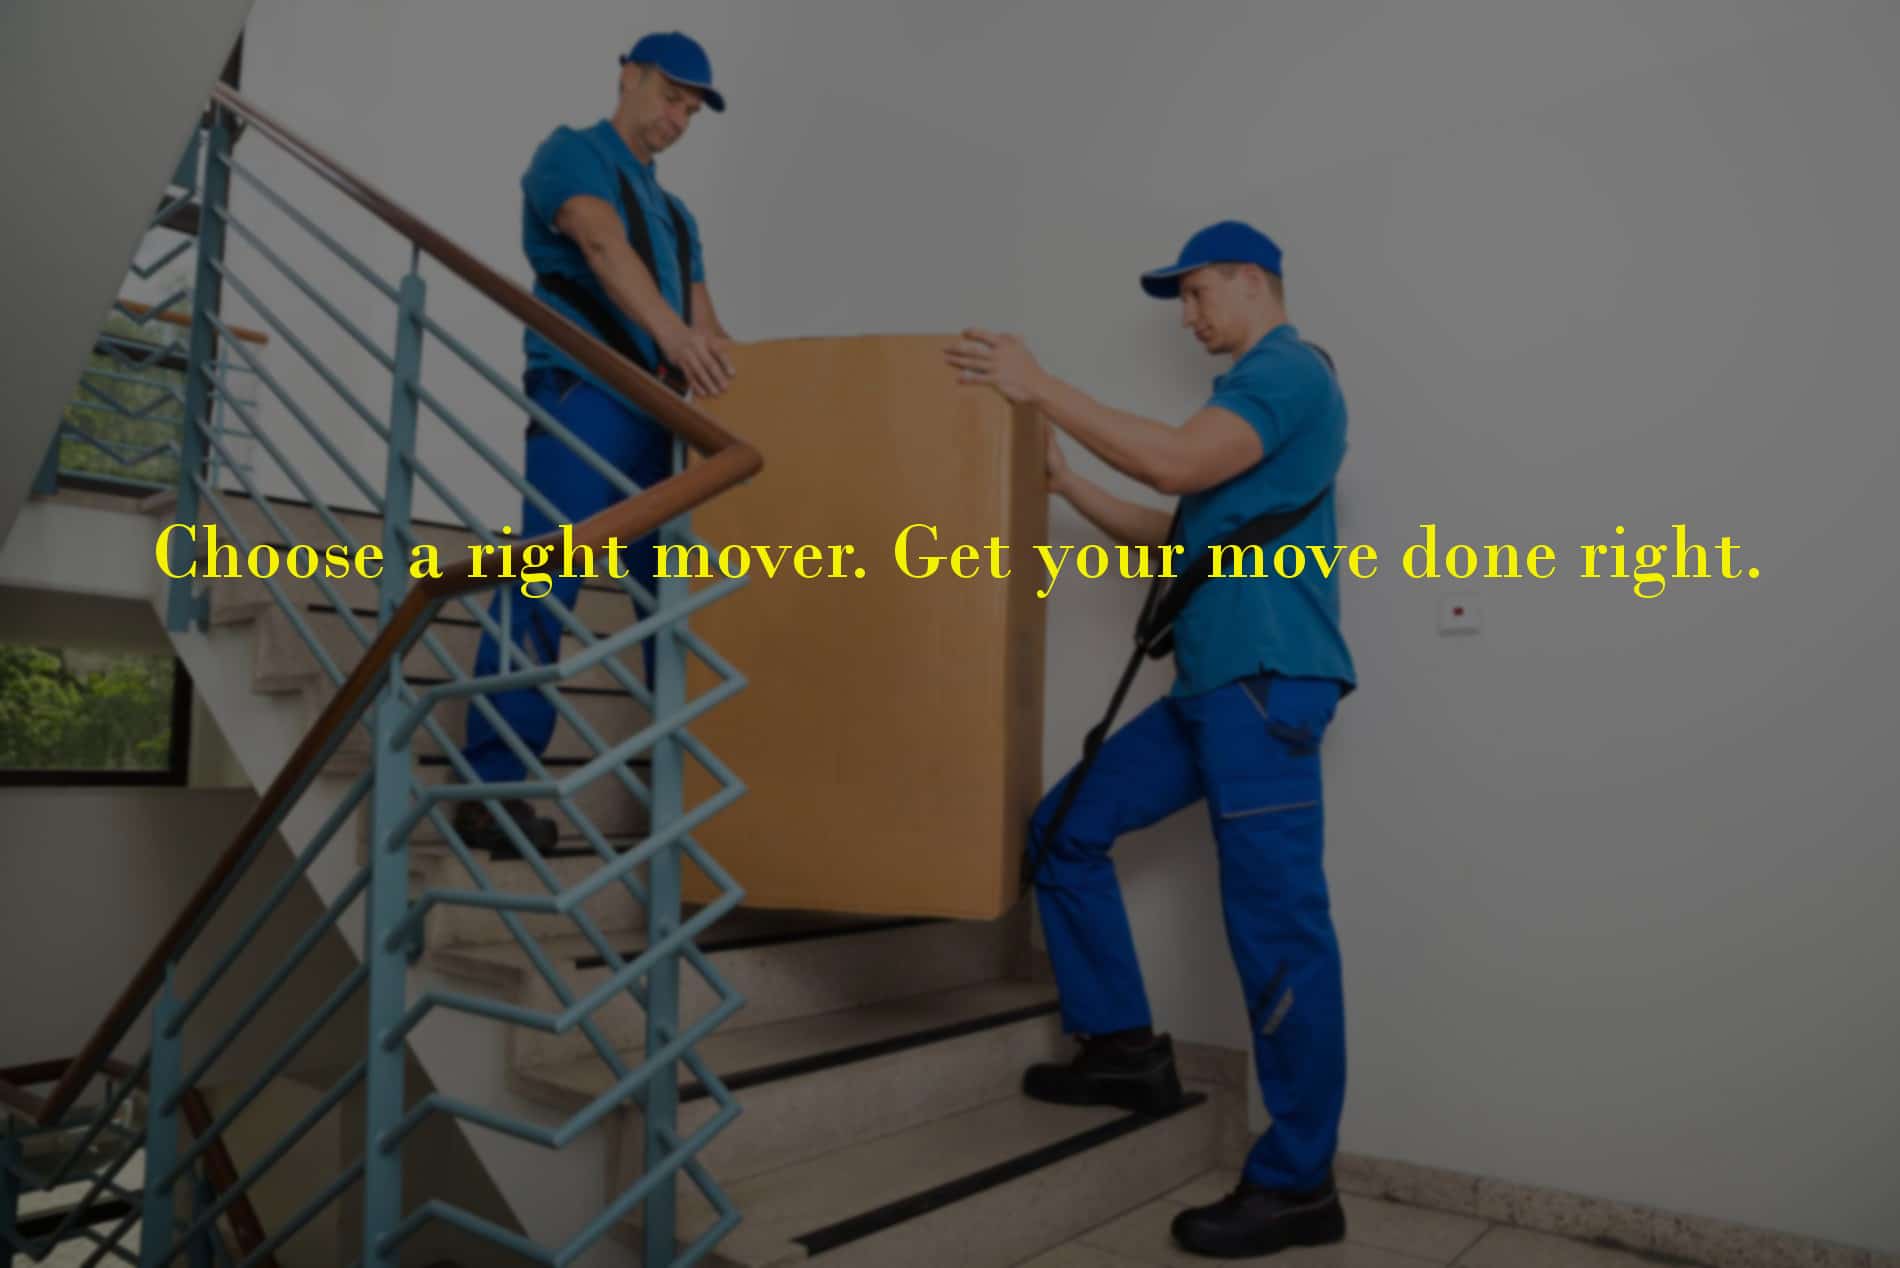 five tips on choosing right moving company